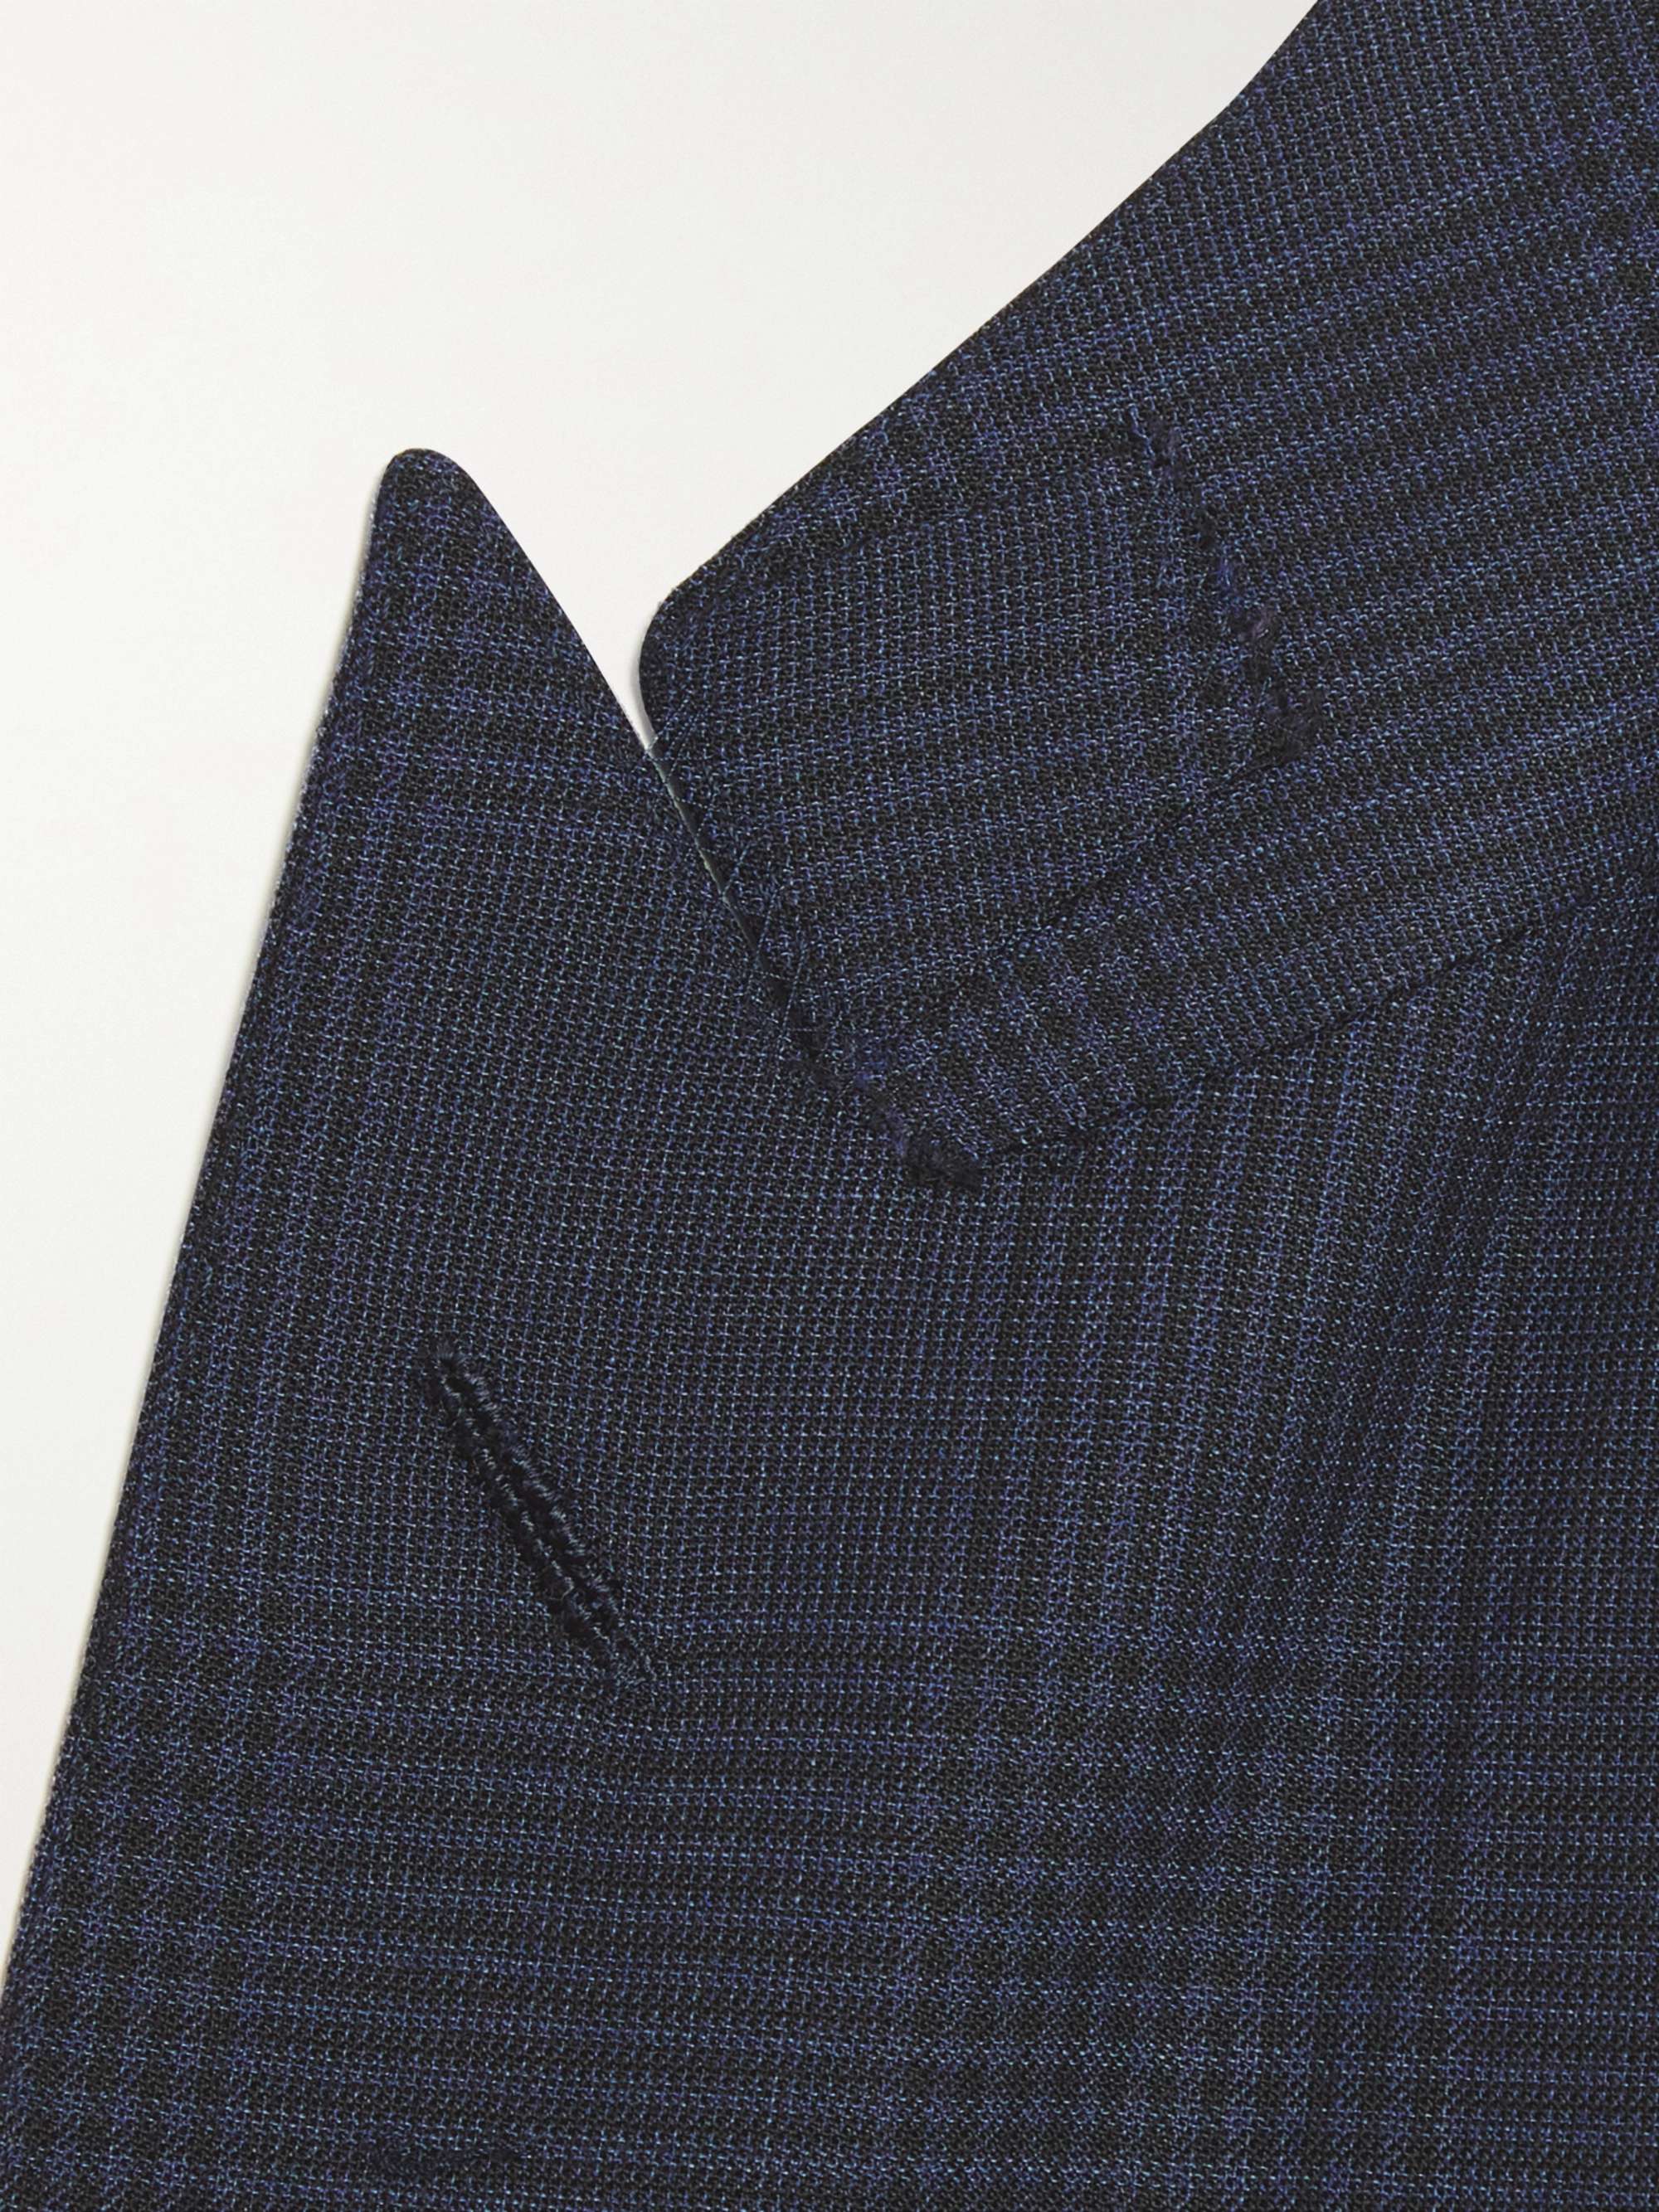 TOM FORD Shelton Slim-Fit Prince of Wales Checked Wool and Silk-Blend Suit Jacket